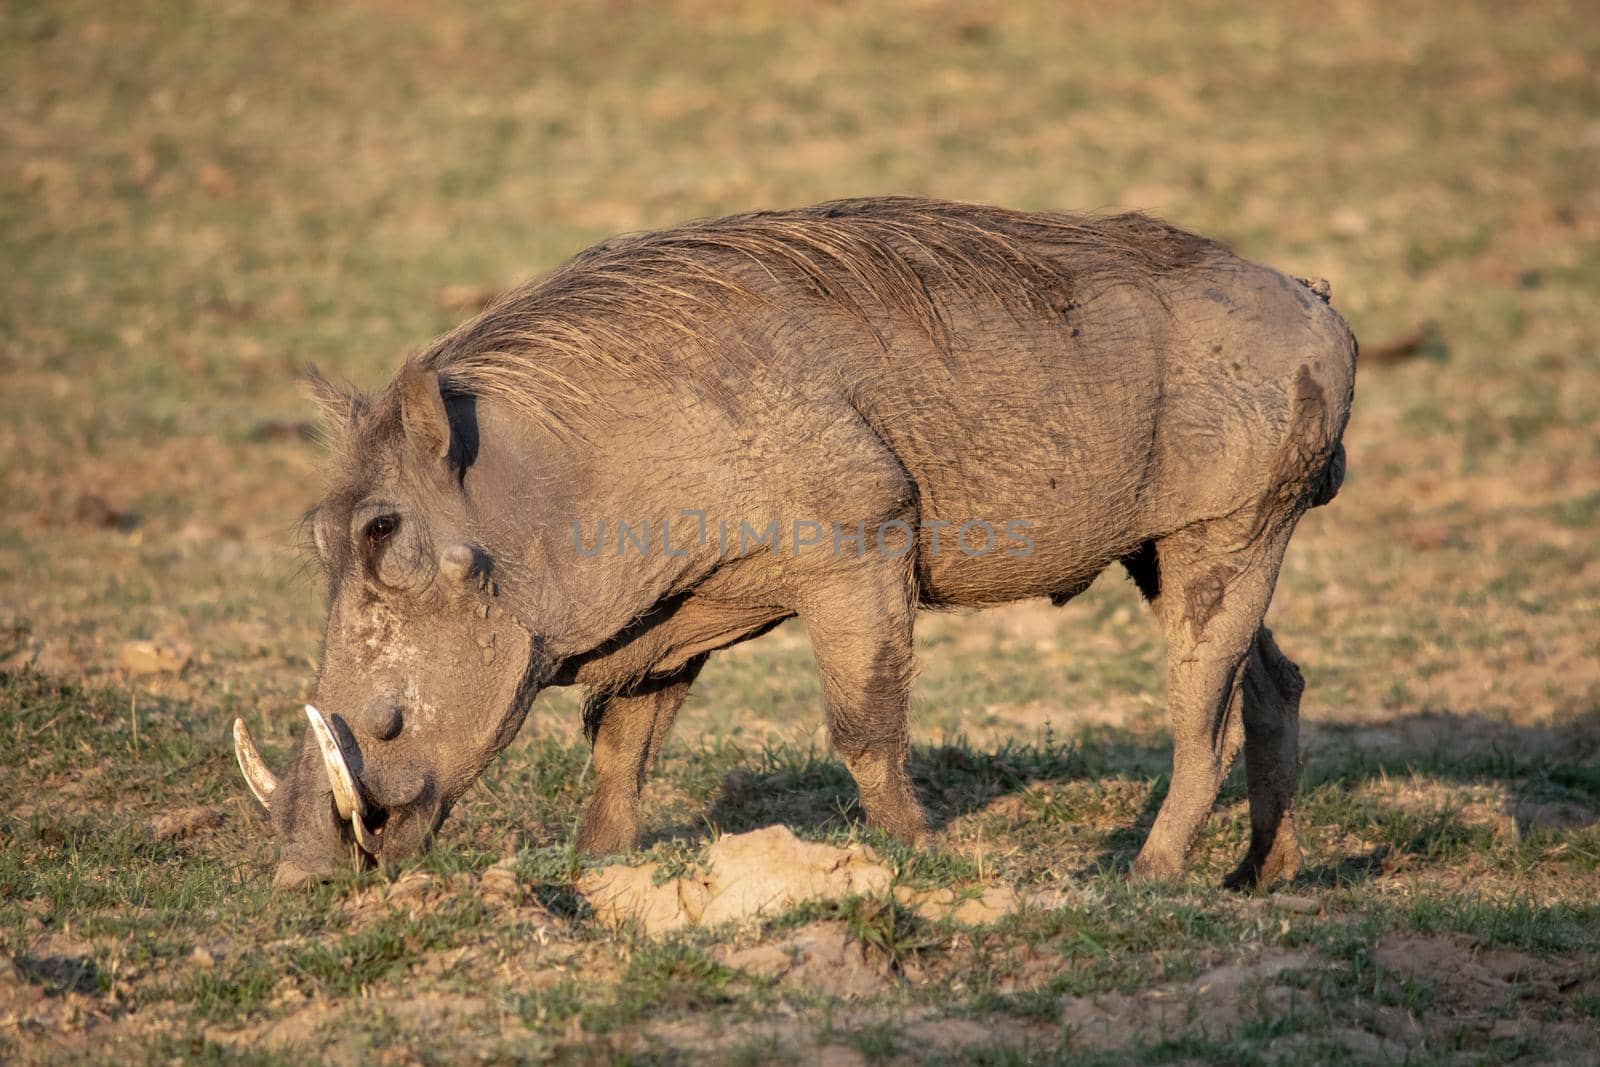 Close-up of a huge warthog eating in the savanna by silentstock639